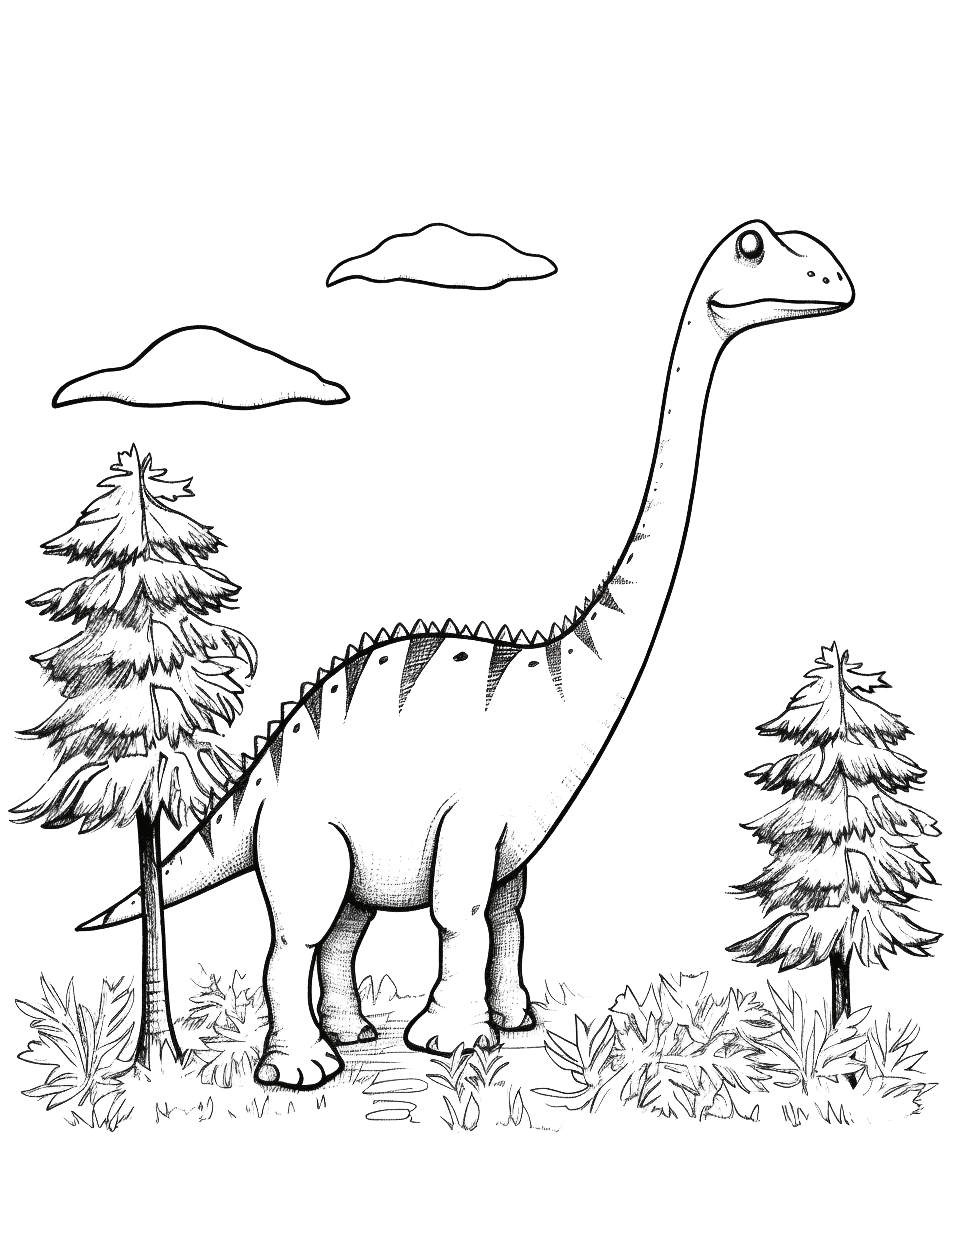 Brachiosaurus Grazing Coloring Page - A Brachiosaurus peacefully grazing on the top of tall trees.